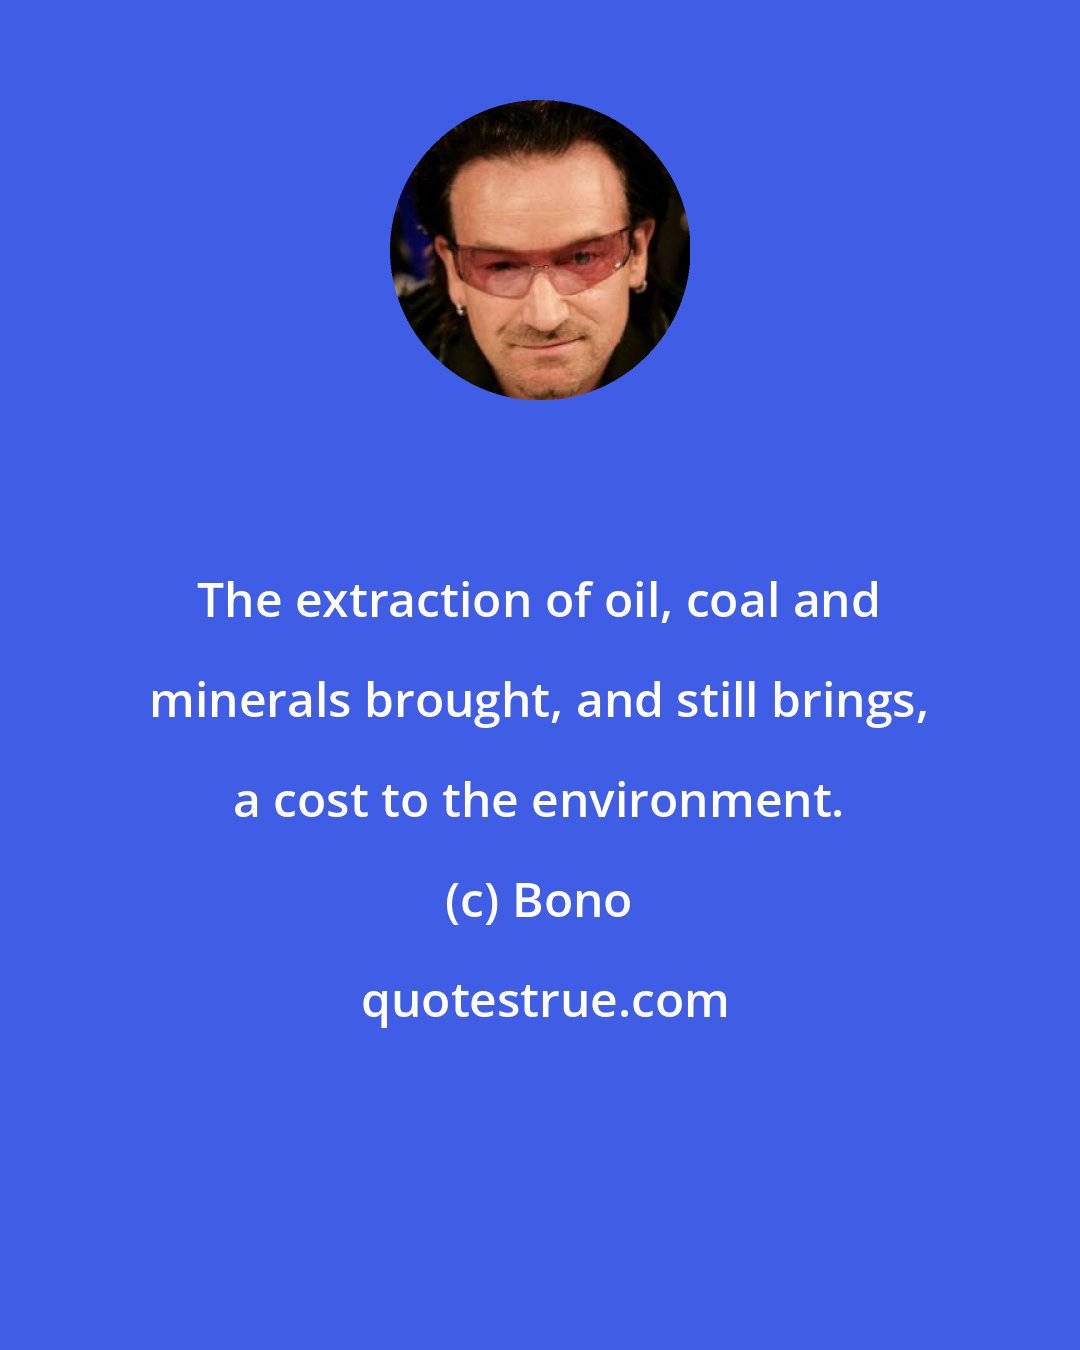 Bono: The extraction of oil, coal and minerals brought, and still brings, a cost to the environment.